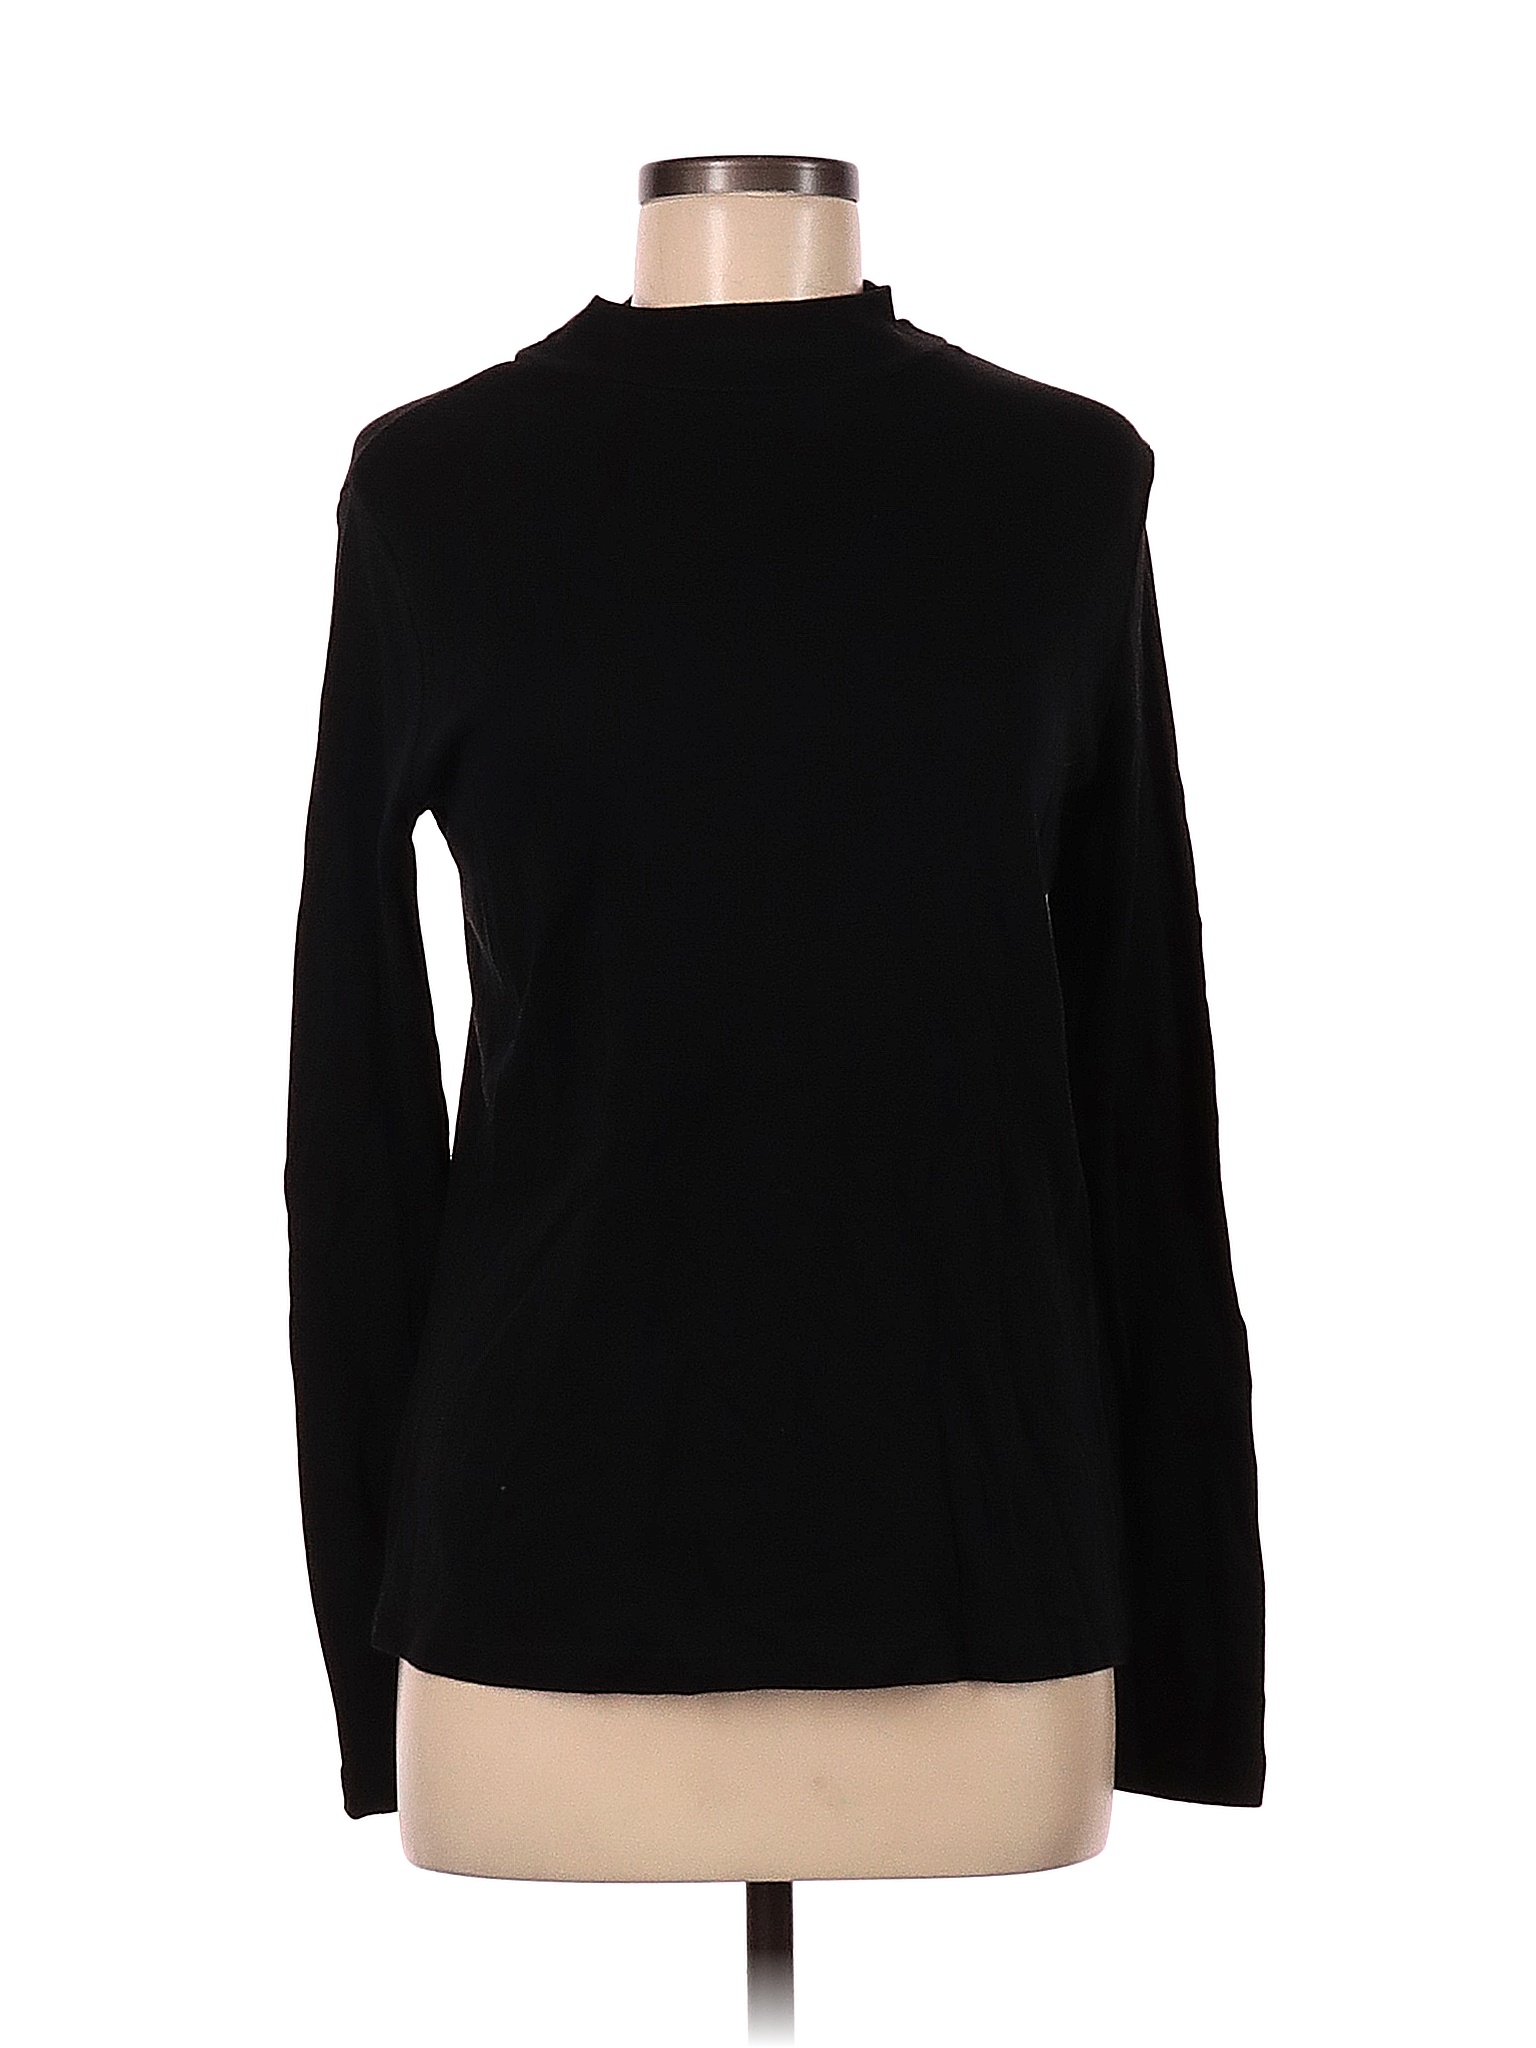 White Stag 100% Cotton Solid Black Long Sleeve Turtleneck Size M - 57% ...